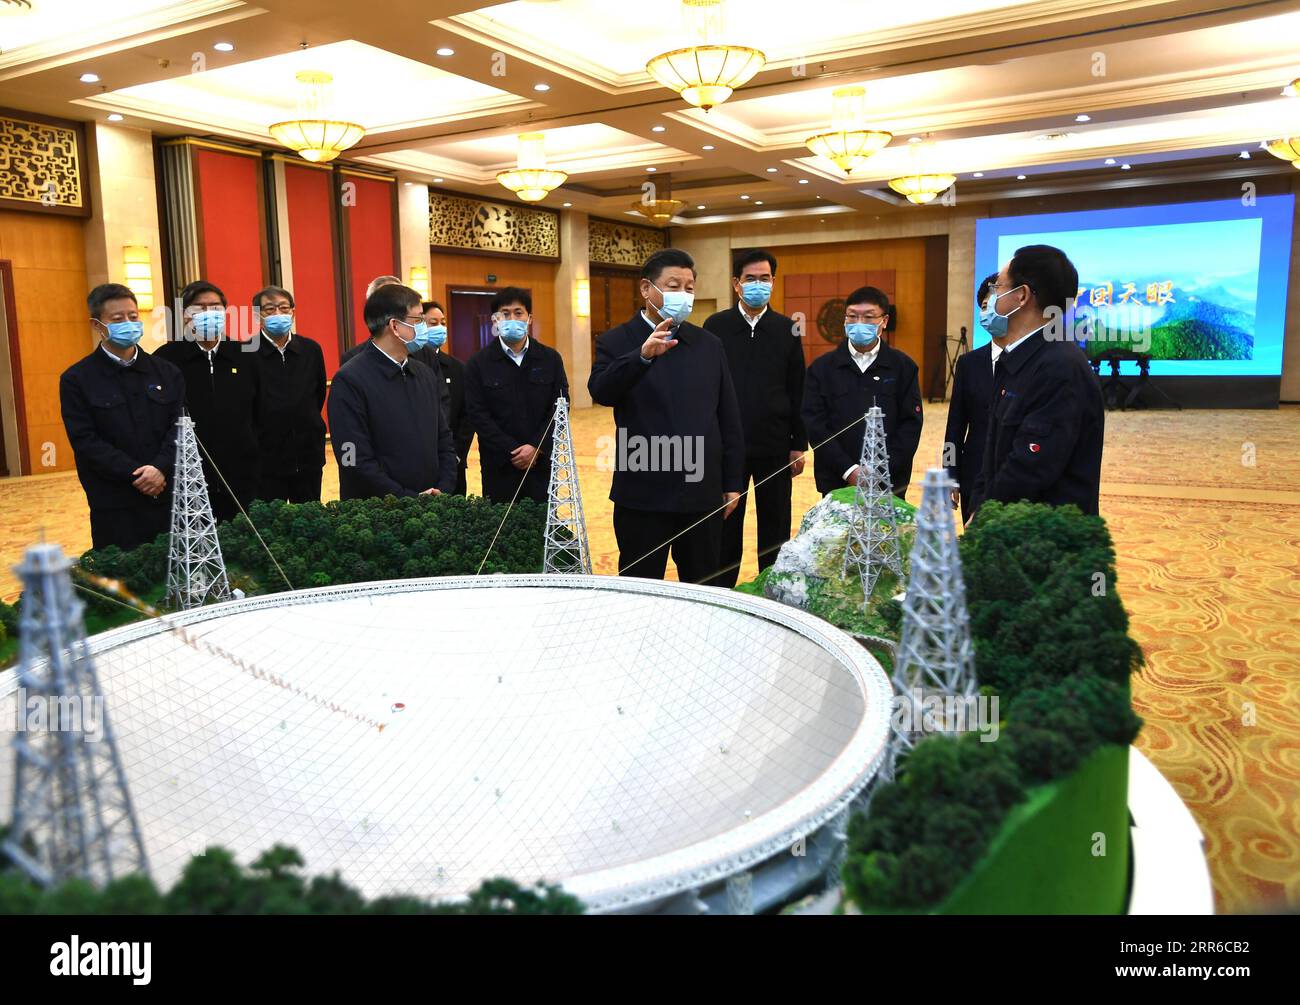 210205 -- GUIYANG, Feb. 5, 2021 -- Chinese President Xi Jinping, also general secretary of the Communist Party of China Central Committee and chairman of the Central Military Commission, meets with the project leaders and core scientists of China s Five-hundred-meter Aperture Spherical Radio Telescope FAST in southwest China s Guizhou Province, Feb. 5, 2021. Xi has sent New Year s greetings to Chinese people of all ethnic groups, wishing happiness and good fortune for the people and prosperity for the nation during an inspection trip in southwest China s Guizhou Province from Wednesday to Frid Stock Photo